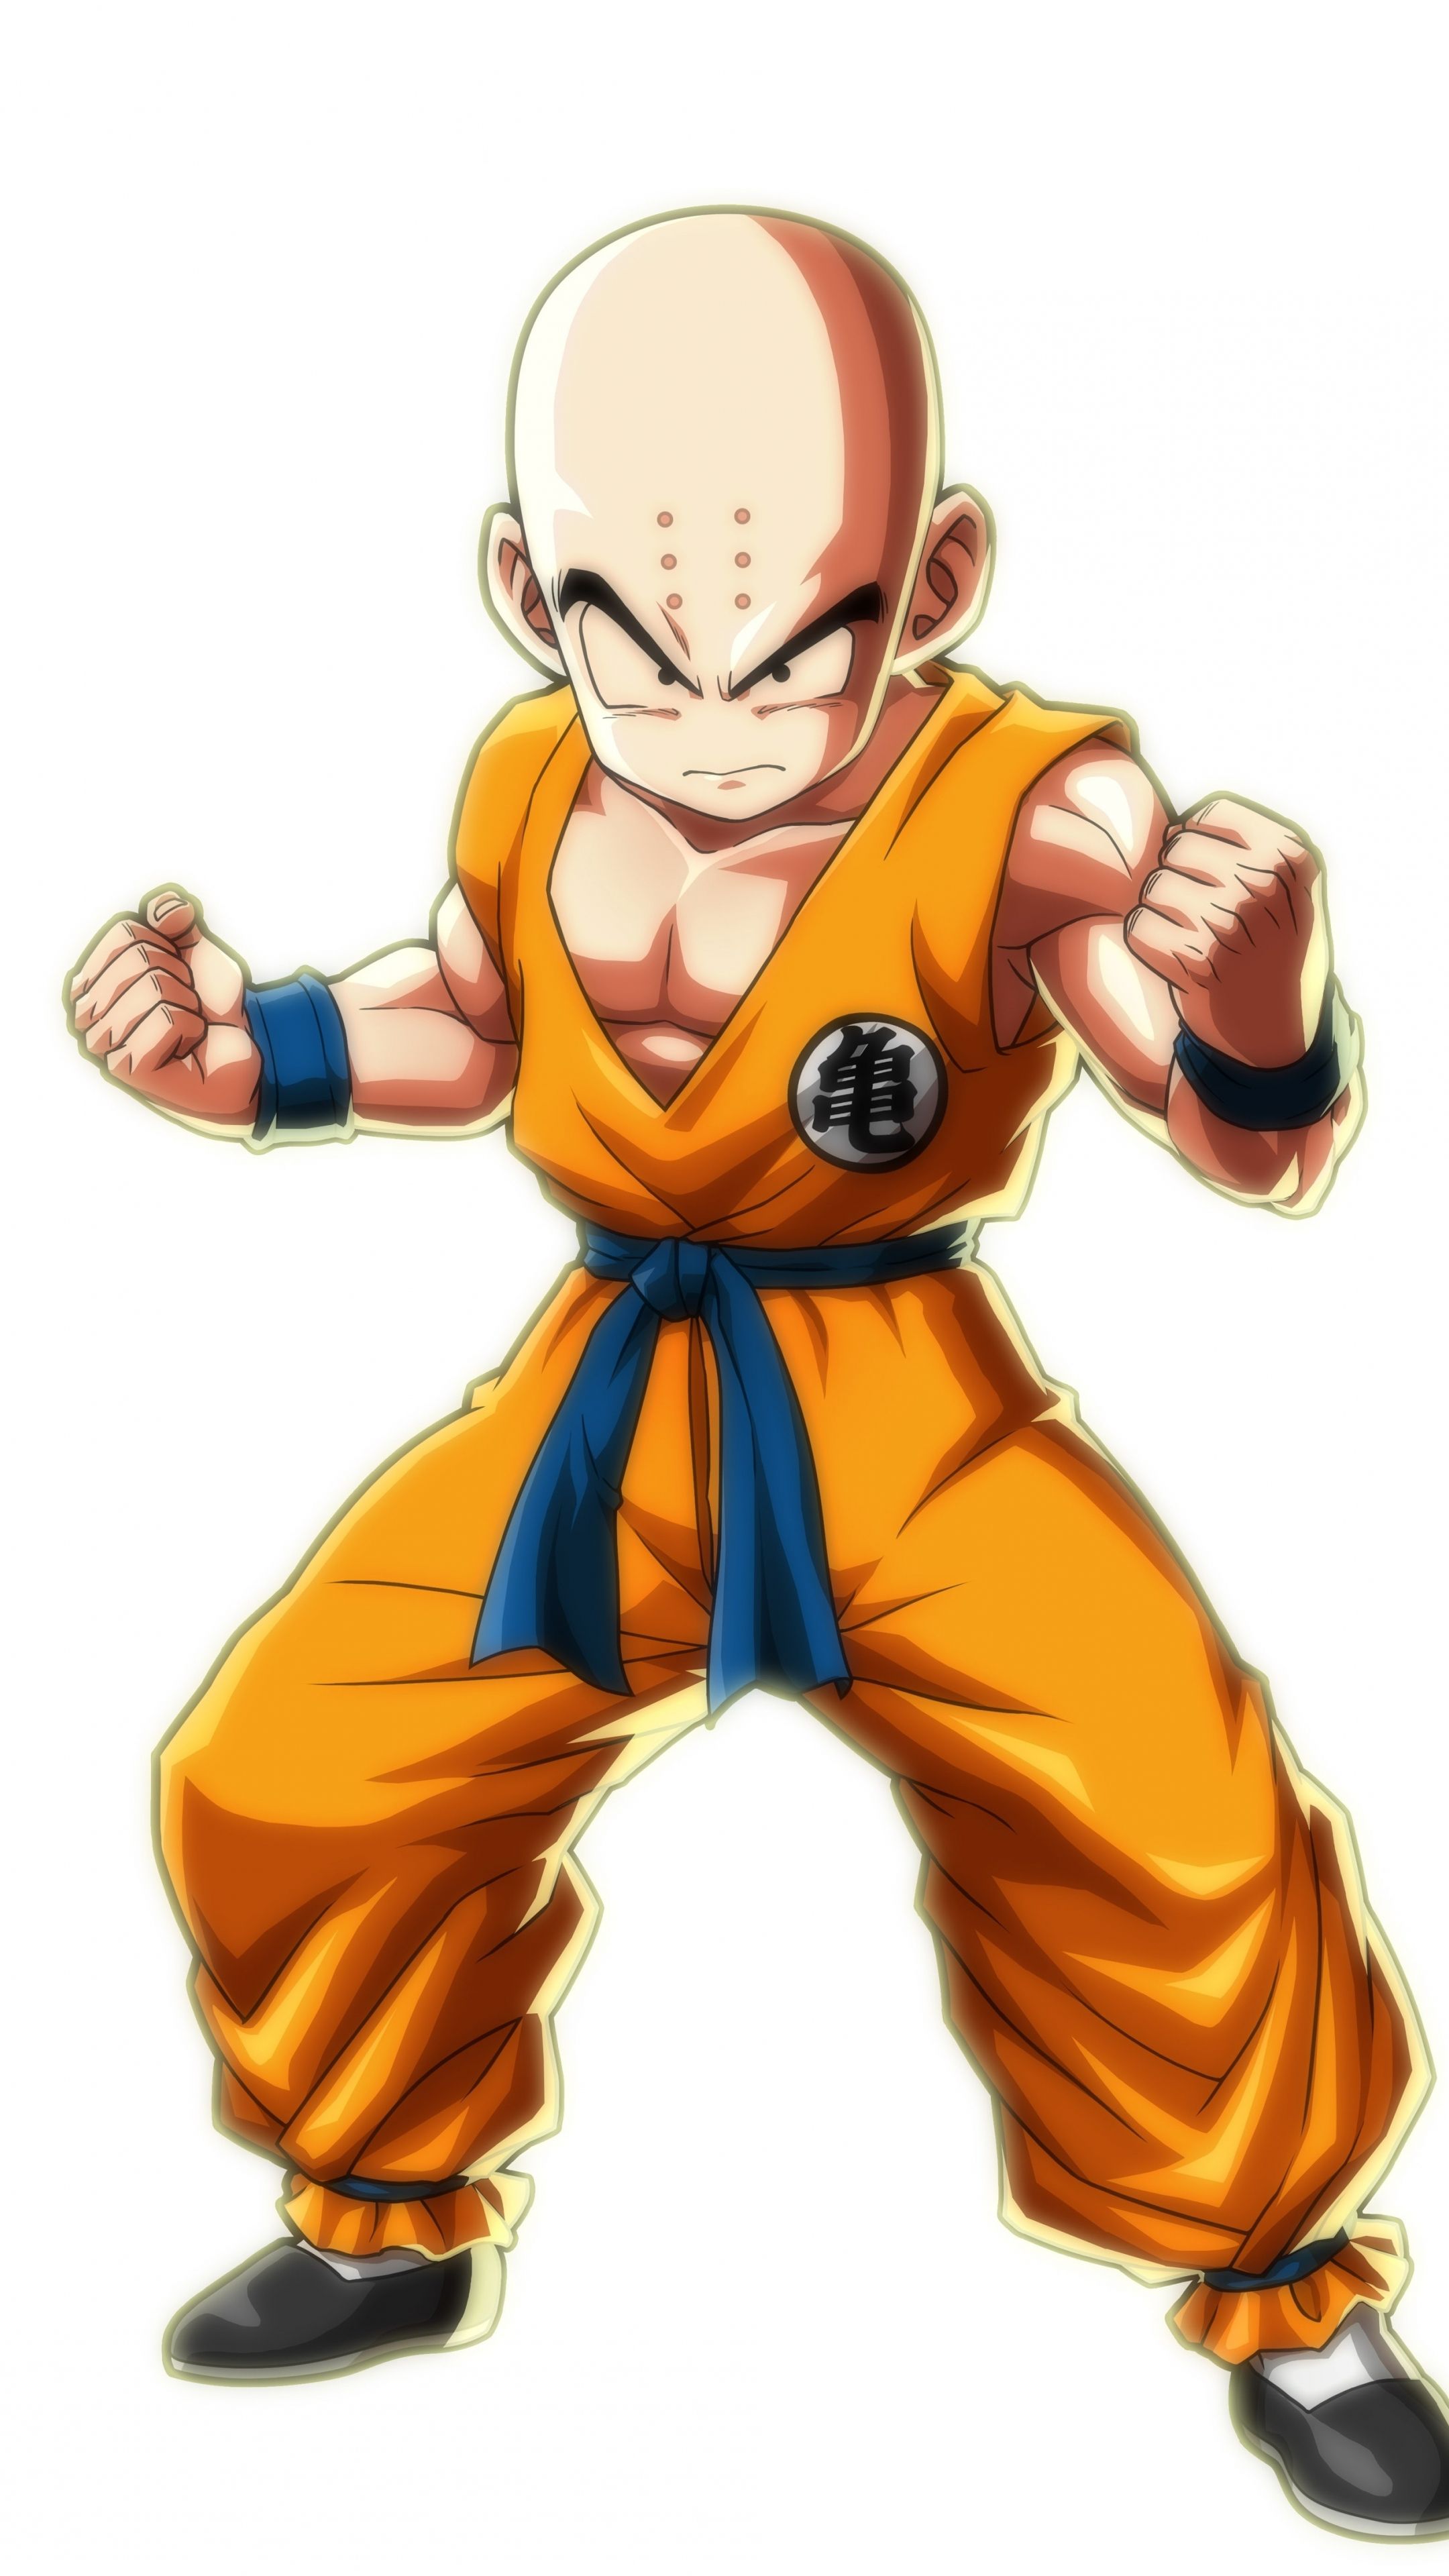 Download 2160x3840 wallpaper bald, krillin, dragon ball fighterz, video game, 4к, sony xperia z5 premium dual, 2160x3840 HD image, background, 6246